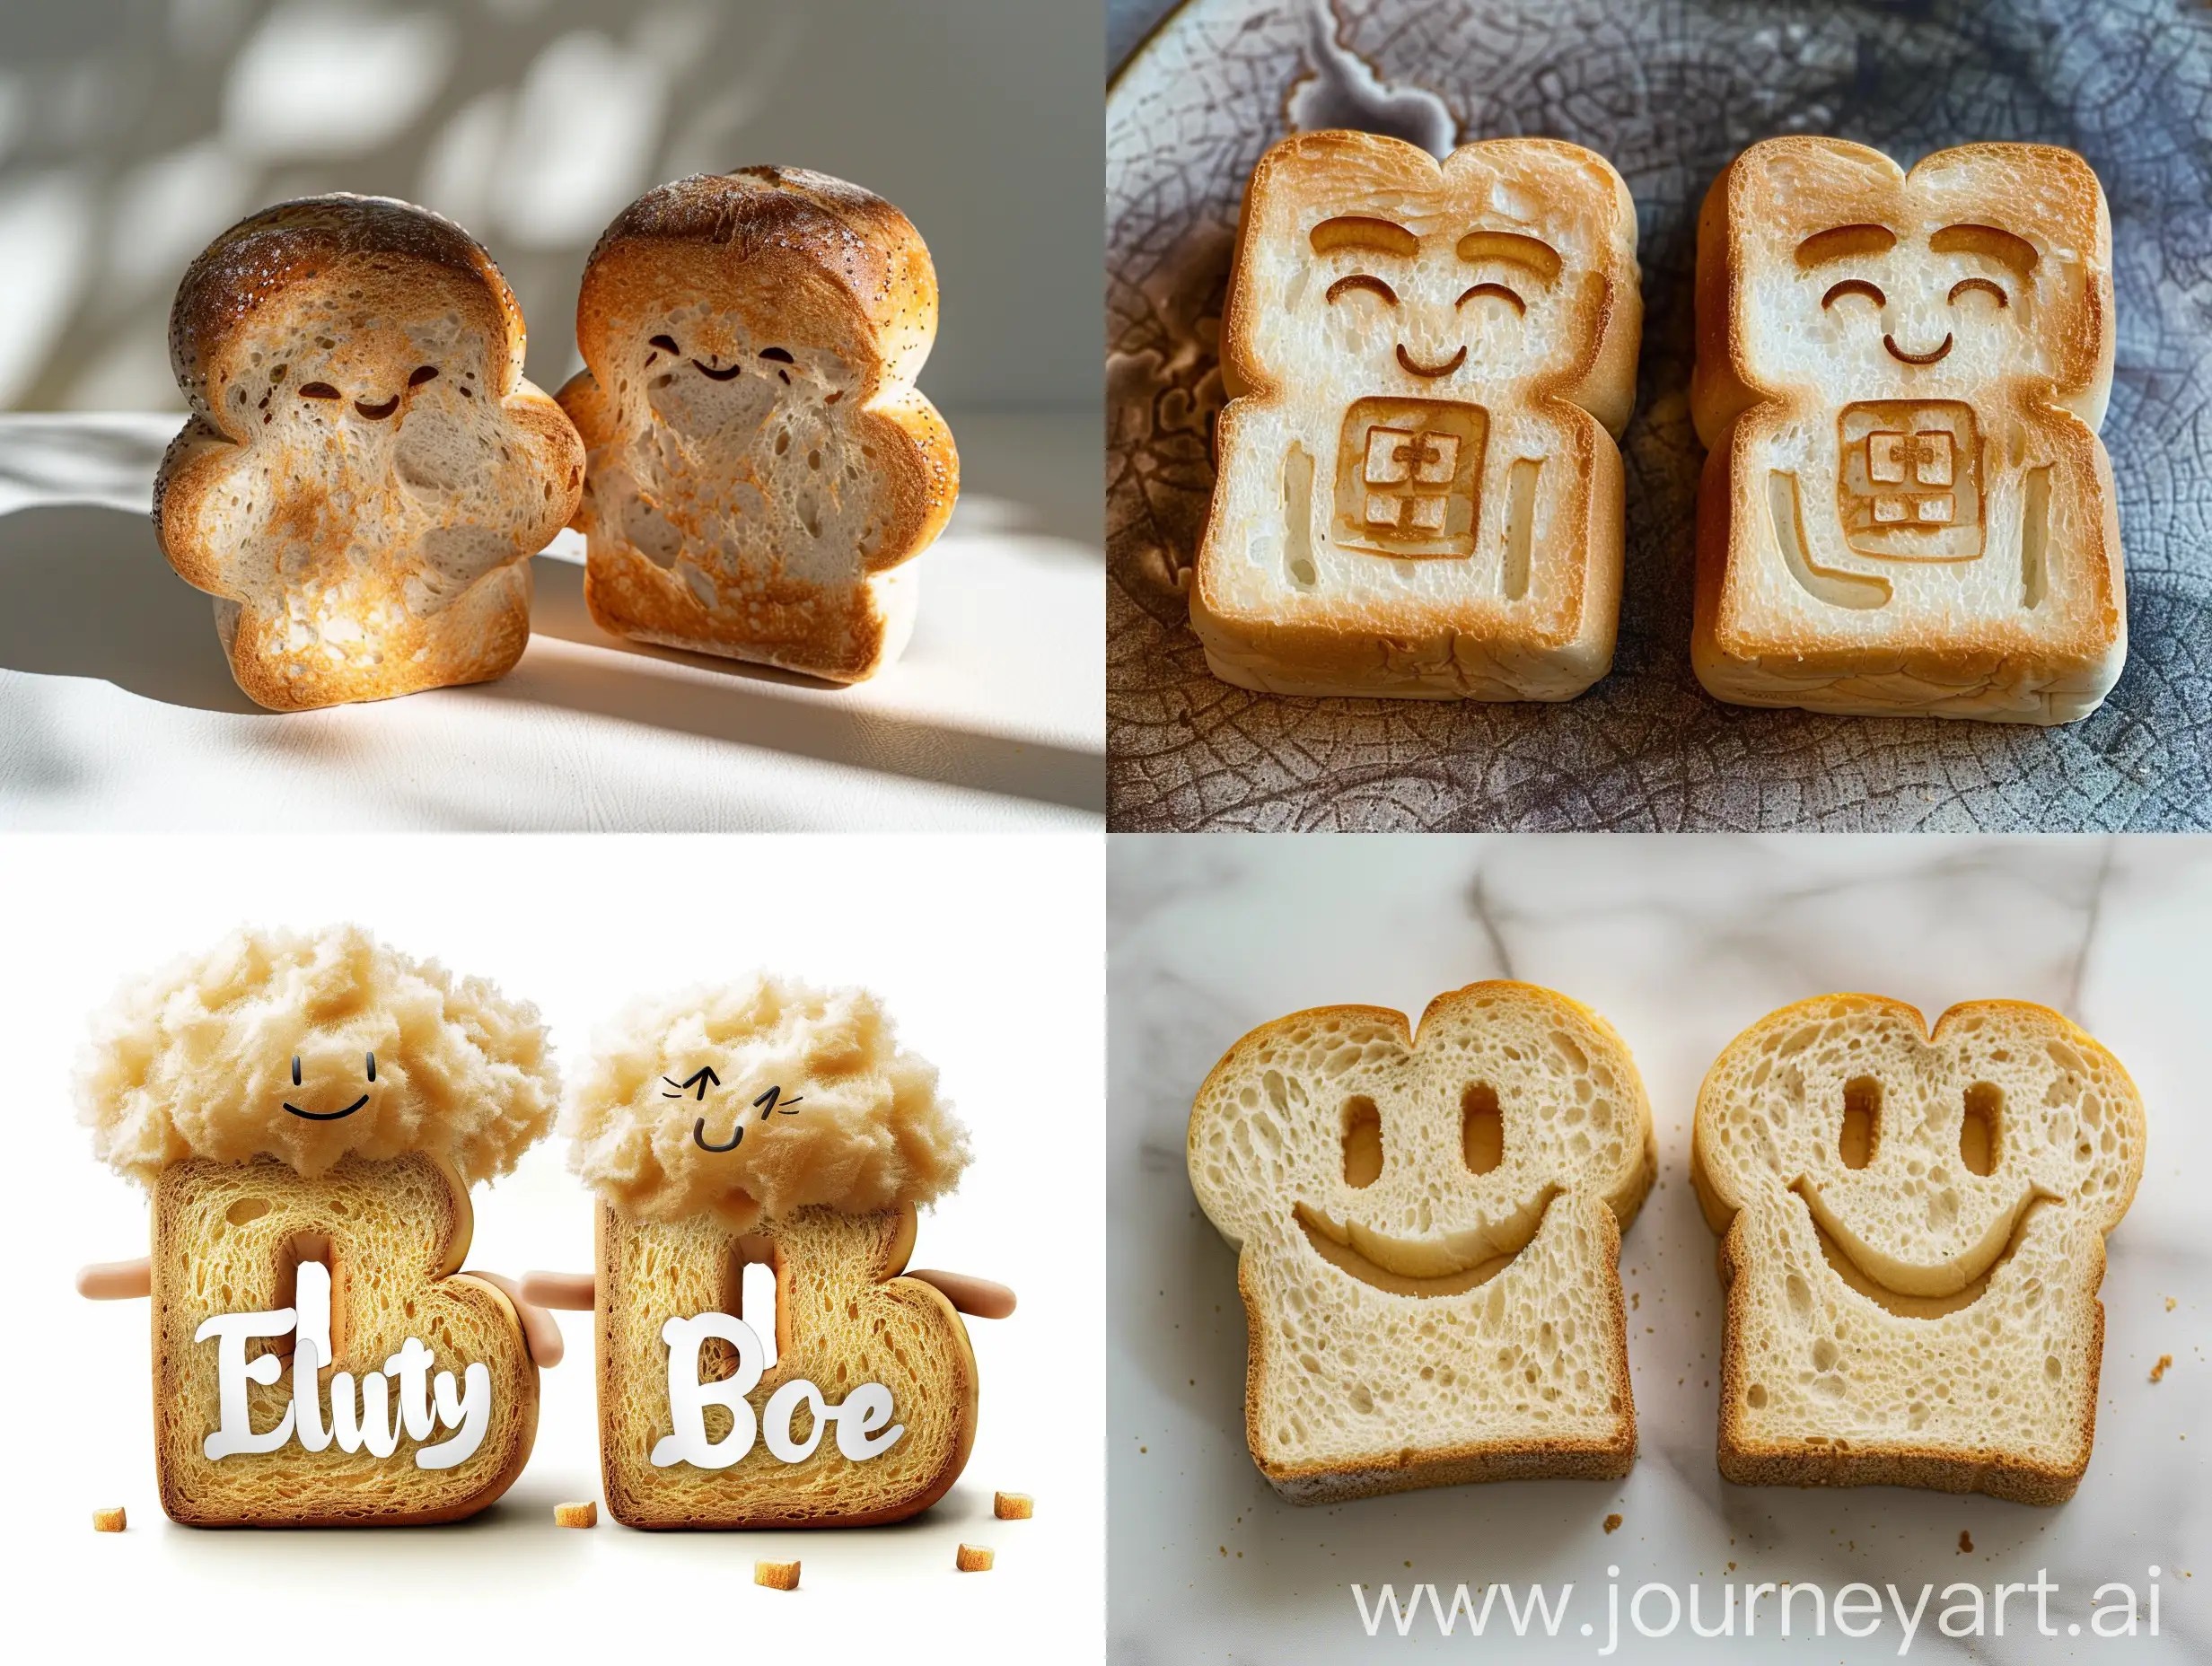 Fluffy-Bread-Character-Portraits-Two-Figures-with-Fluffy-Bread-Strokes